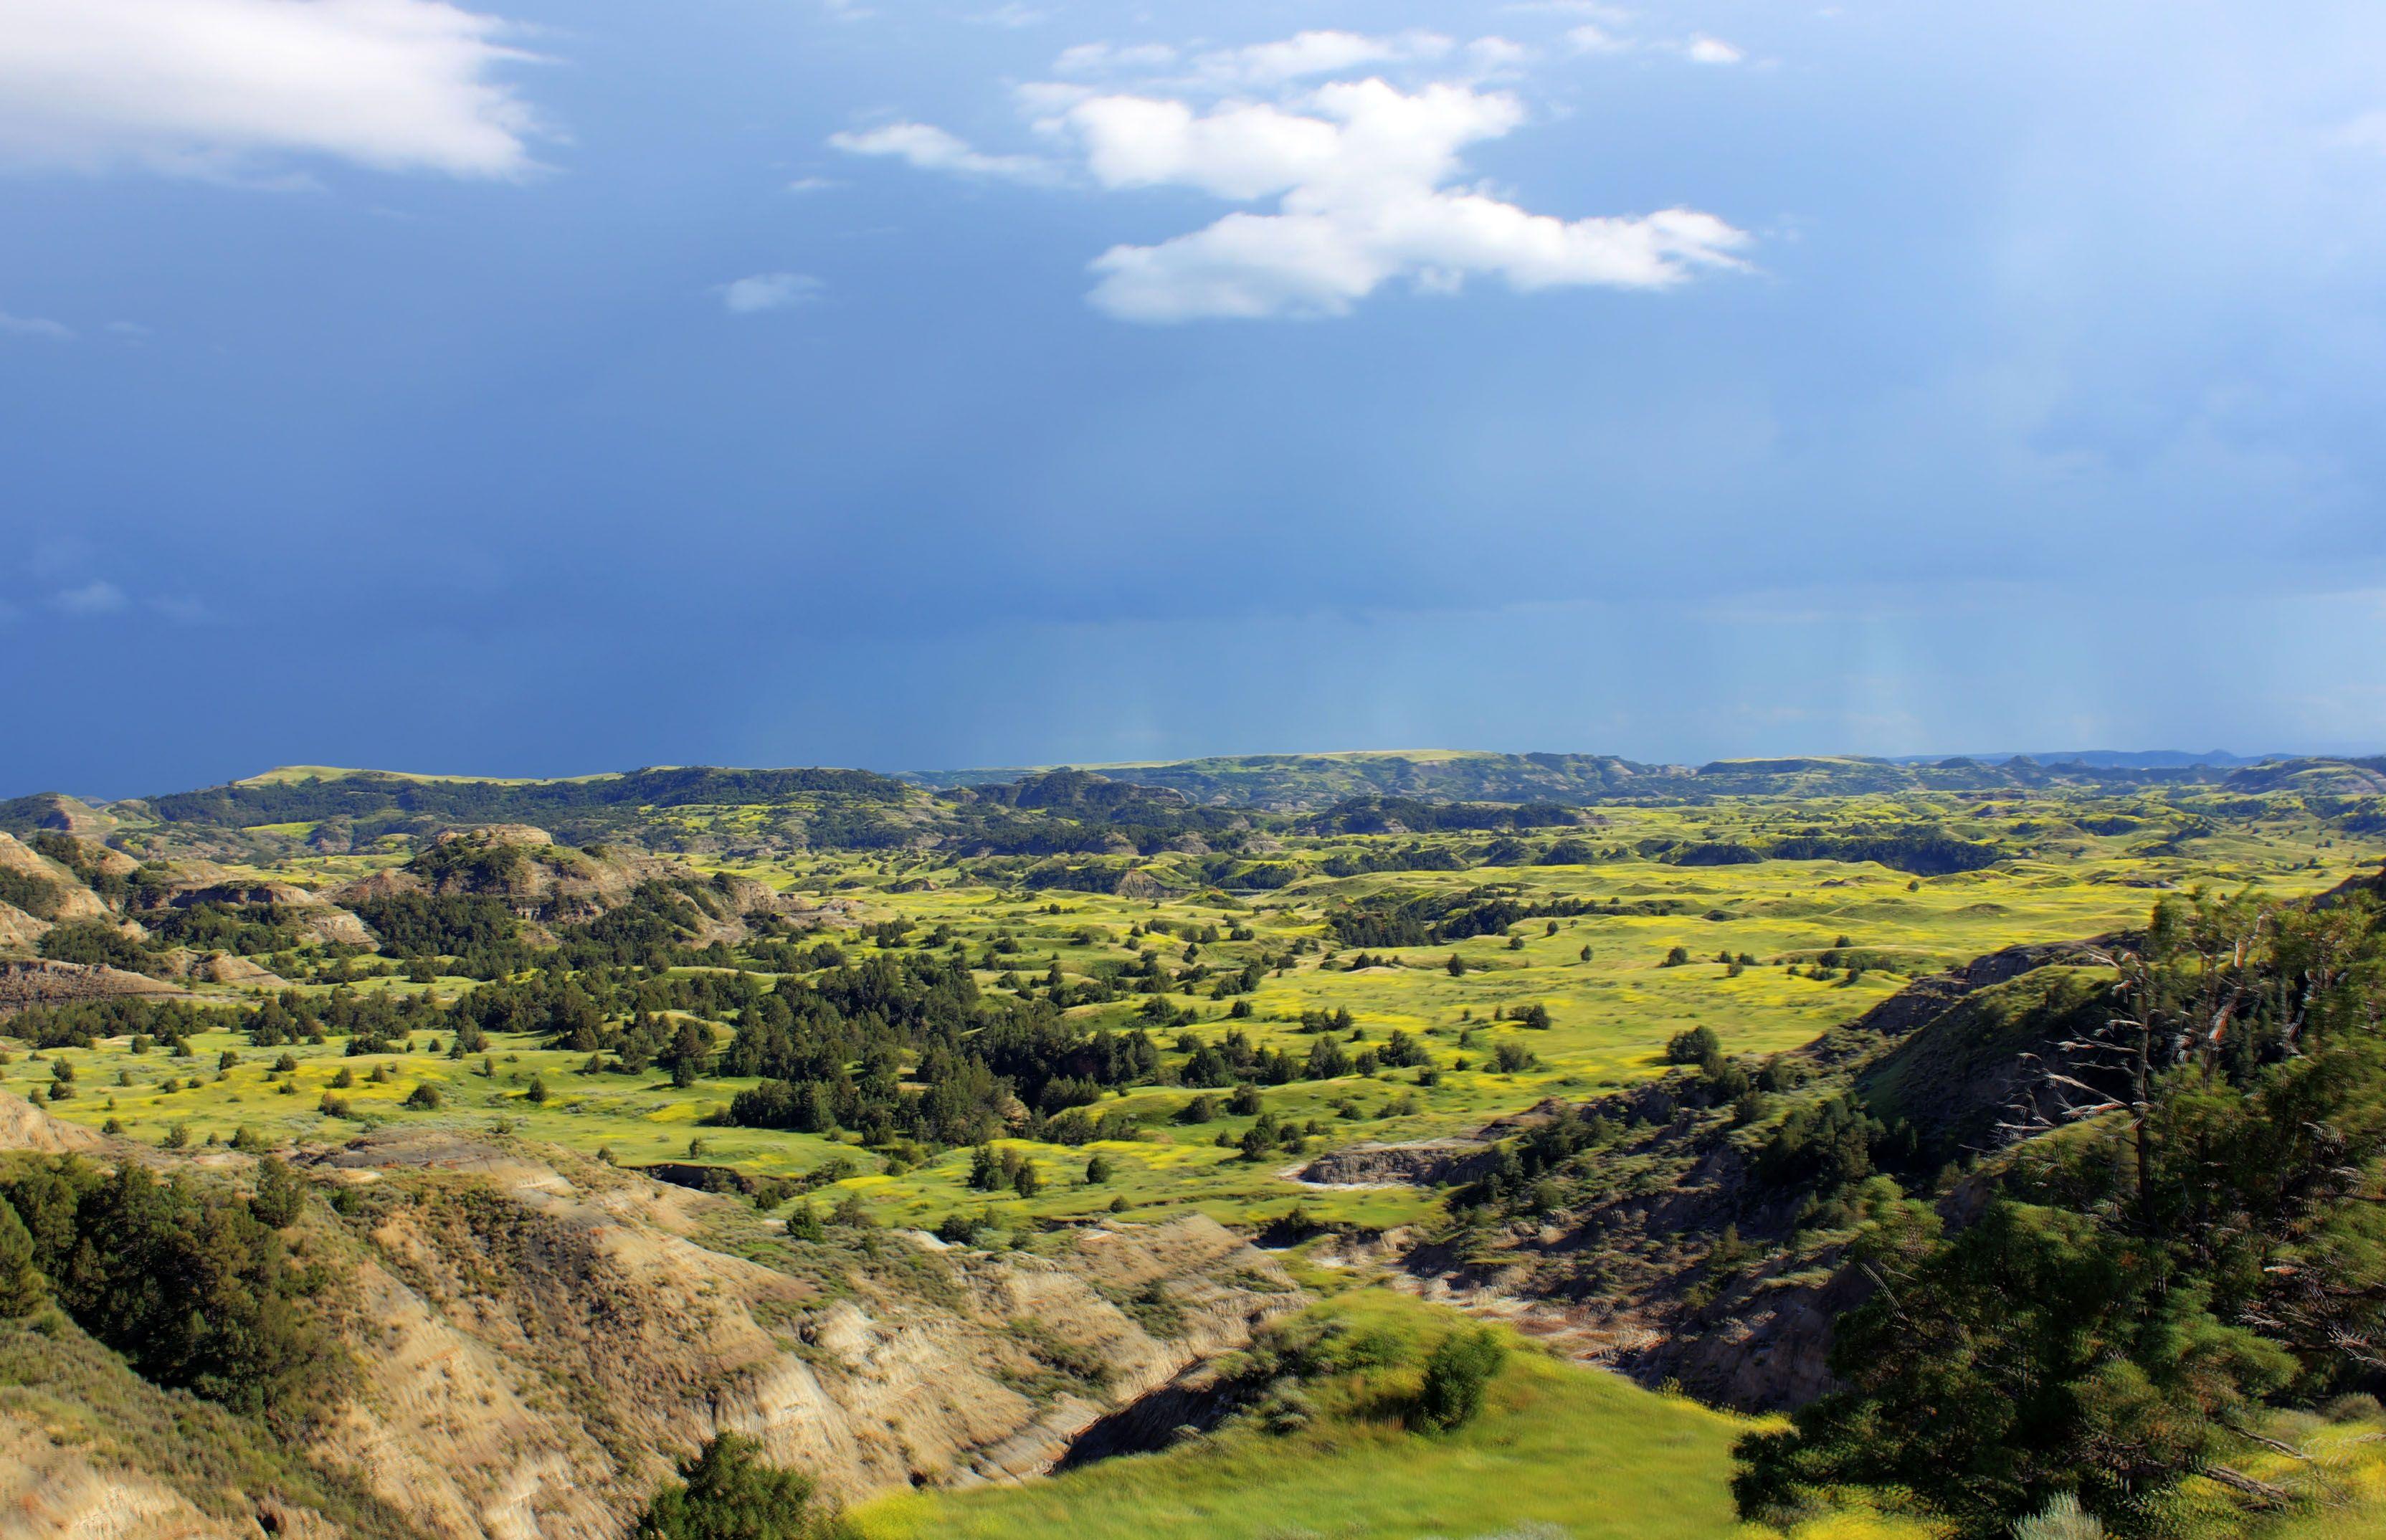 Rain in the valley at Theodore Roosevelt National Park, North